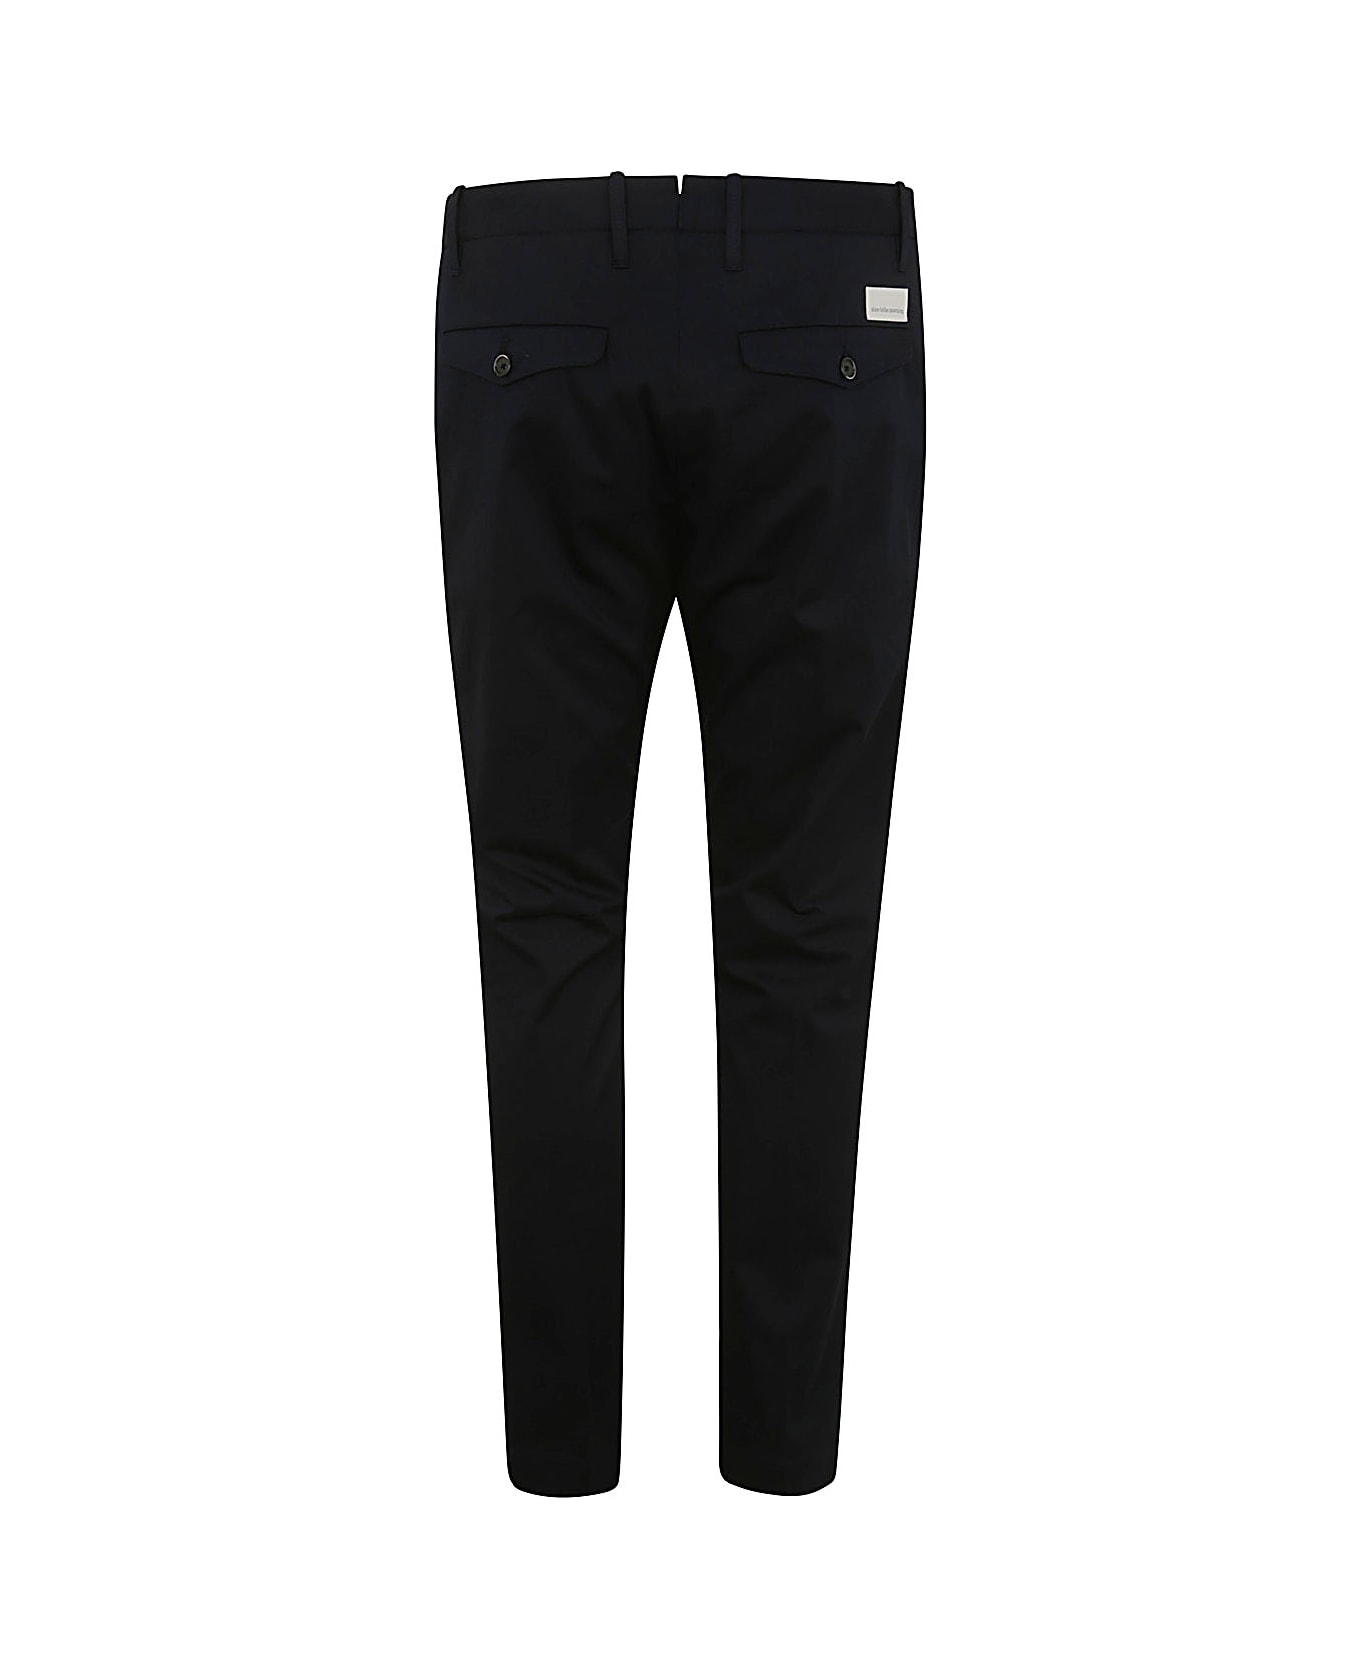 Nine in the Morning Easy Chino Slim Trouser - Navy Blue ボトムス